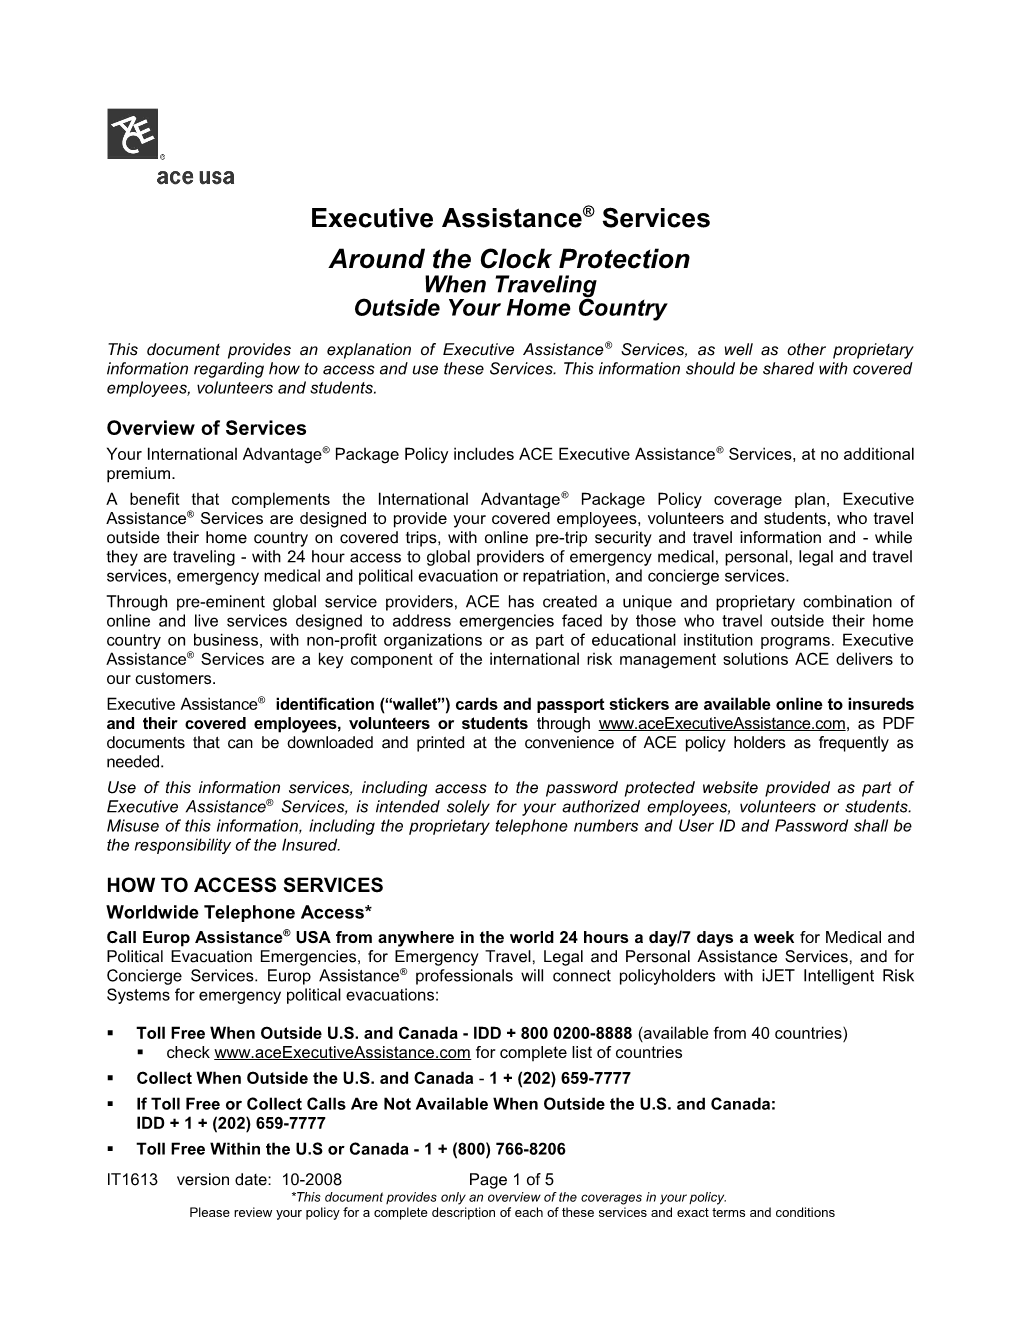 Executive Assistance Services Around the Clock Protection IT1613 Version 10 2008